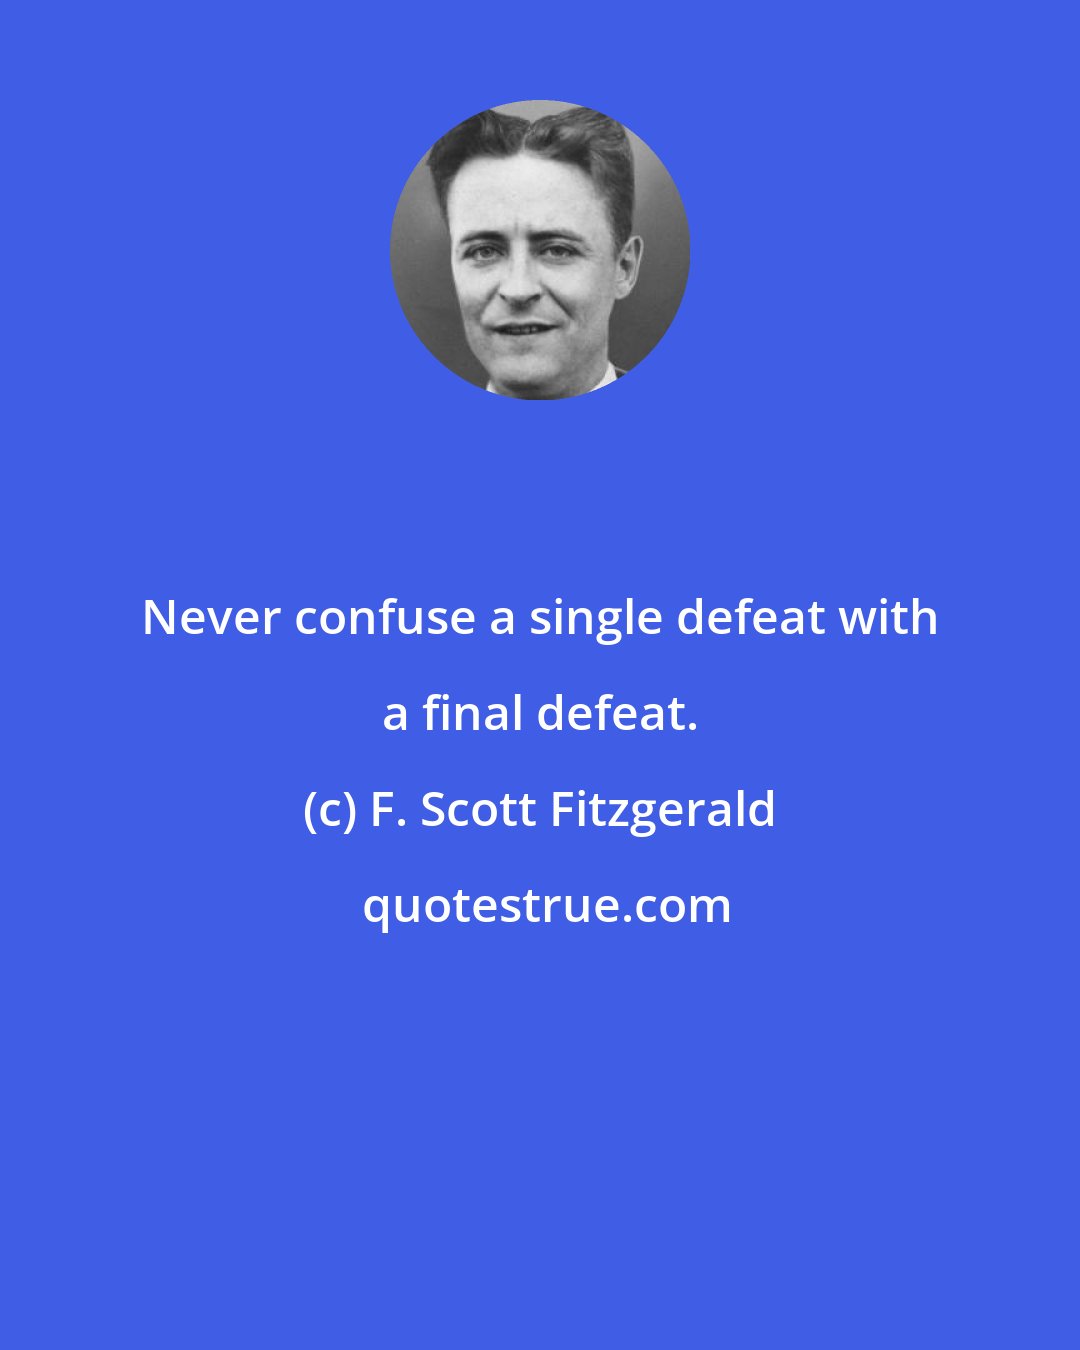 F. Scott Fitzgerald: Never confuse a single defeat with a final defeat.